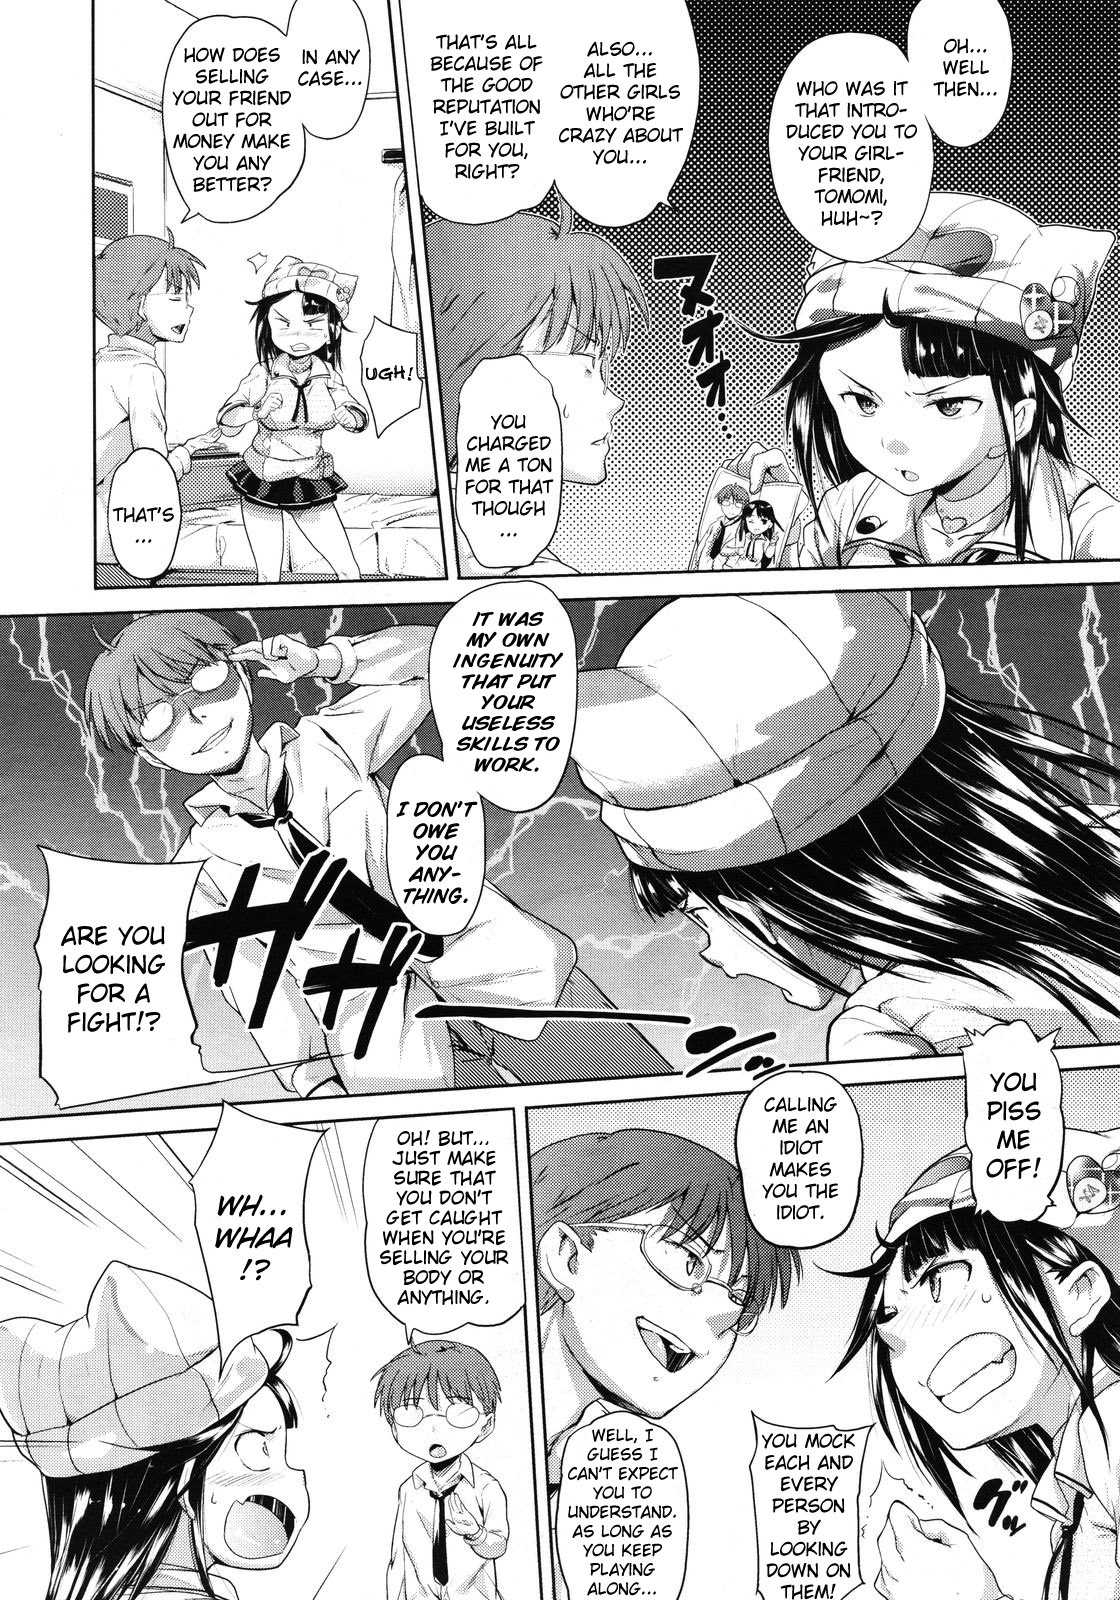 [Knuckle Curve] This Manga is an Offer From Onii-chan (English) {doujin-moe.us} 